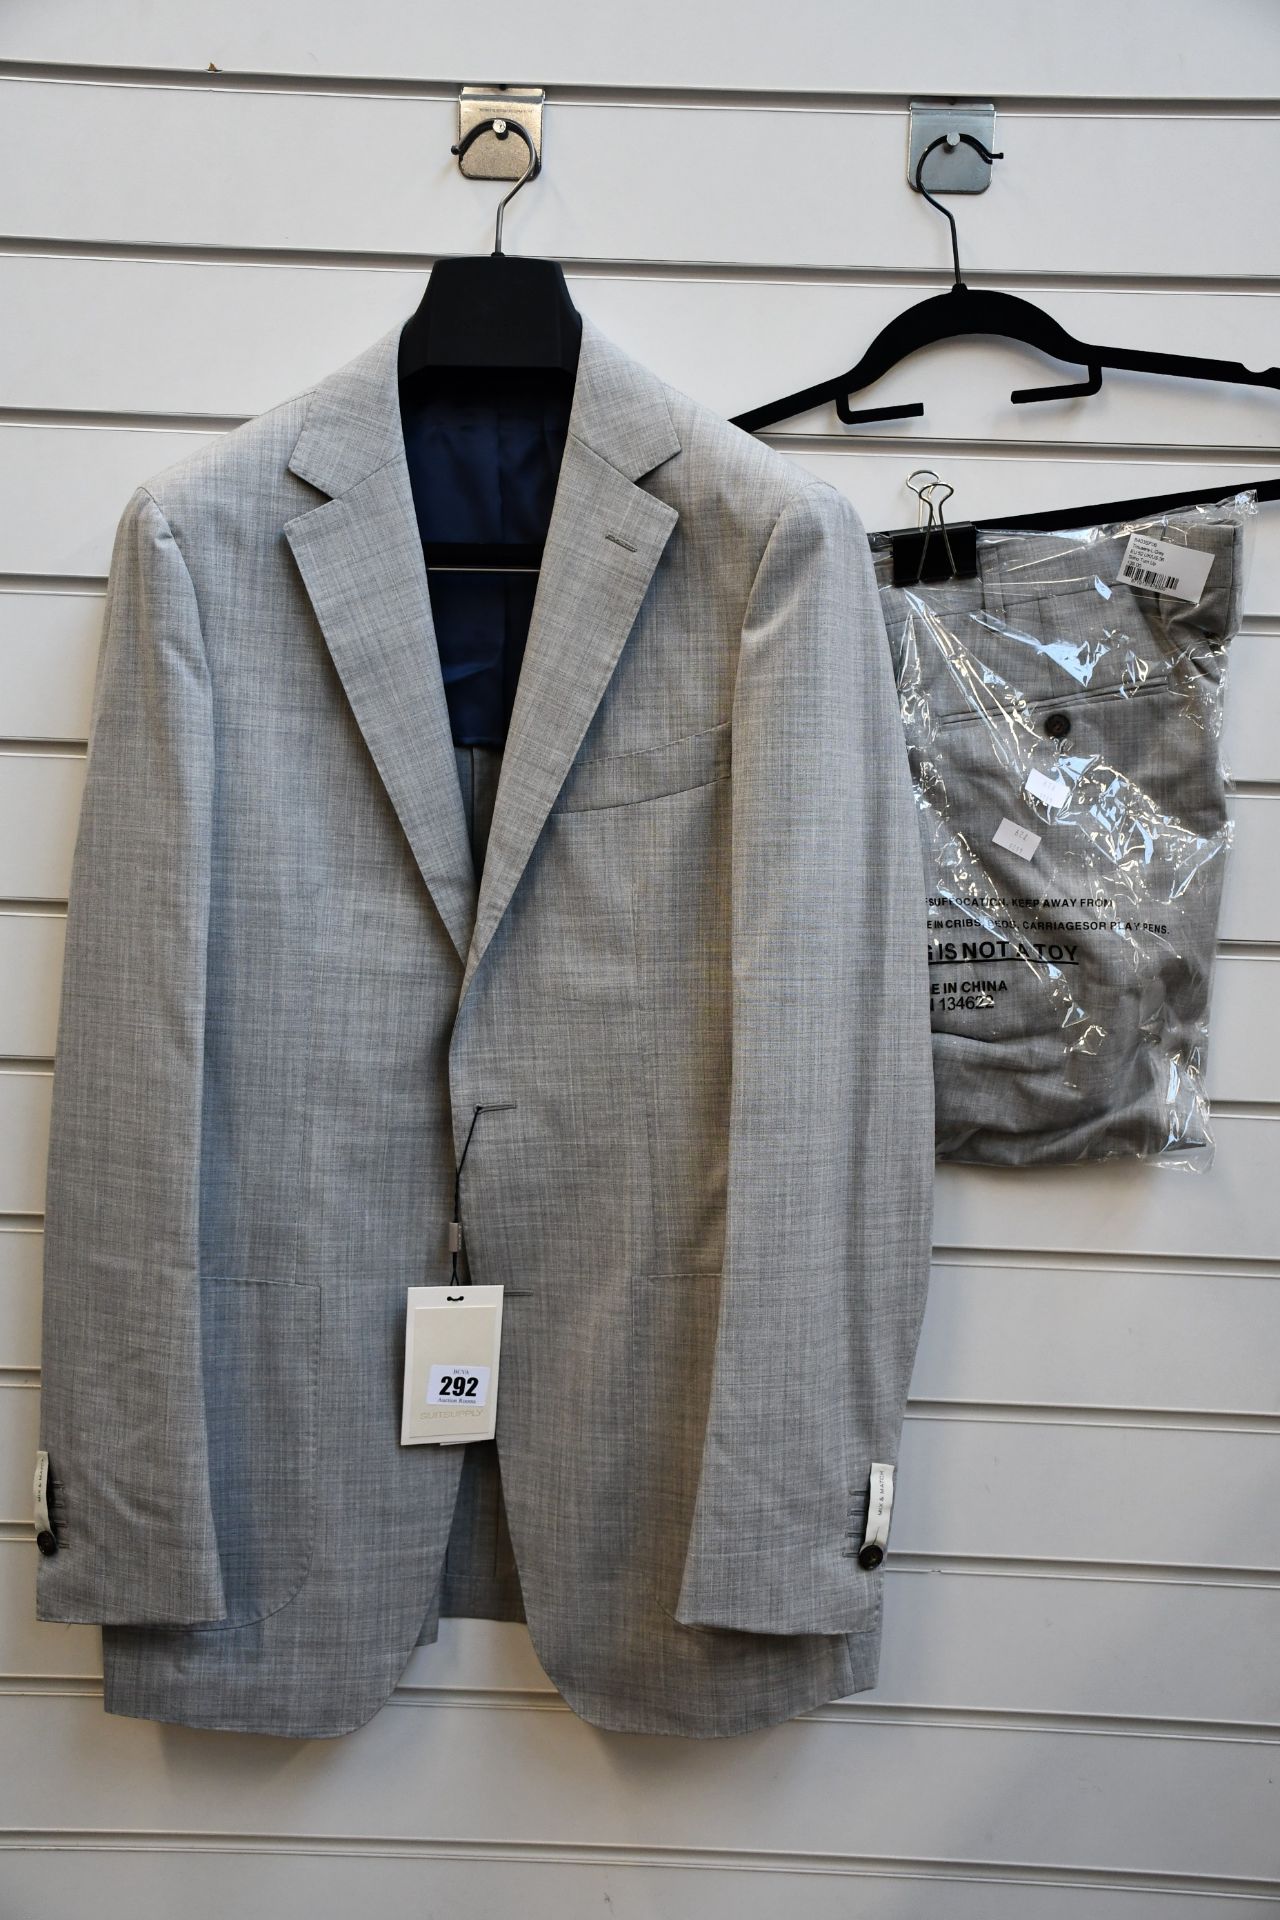 An as new Suit Supply suit in light grey (Jacket 98/40L - RRP £249, trousers EU 52/UK 32 - RRP £